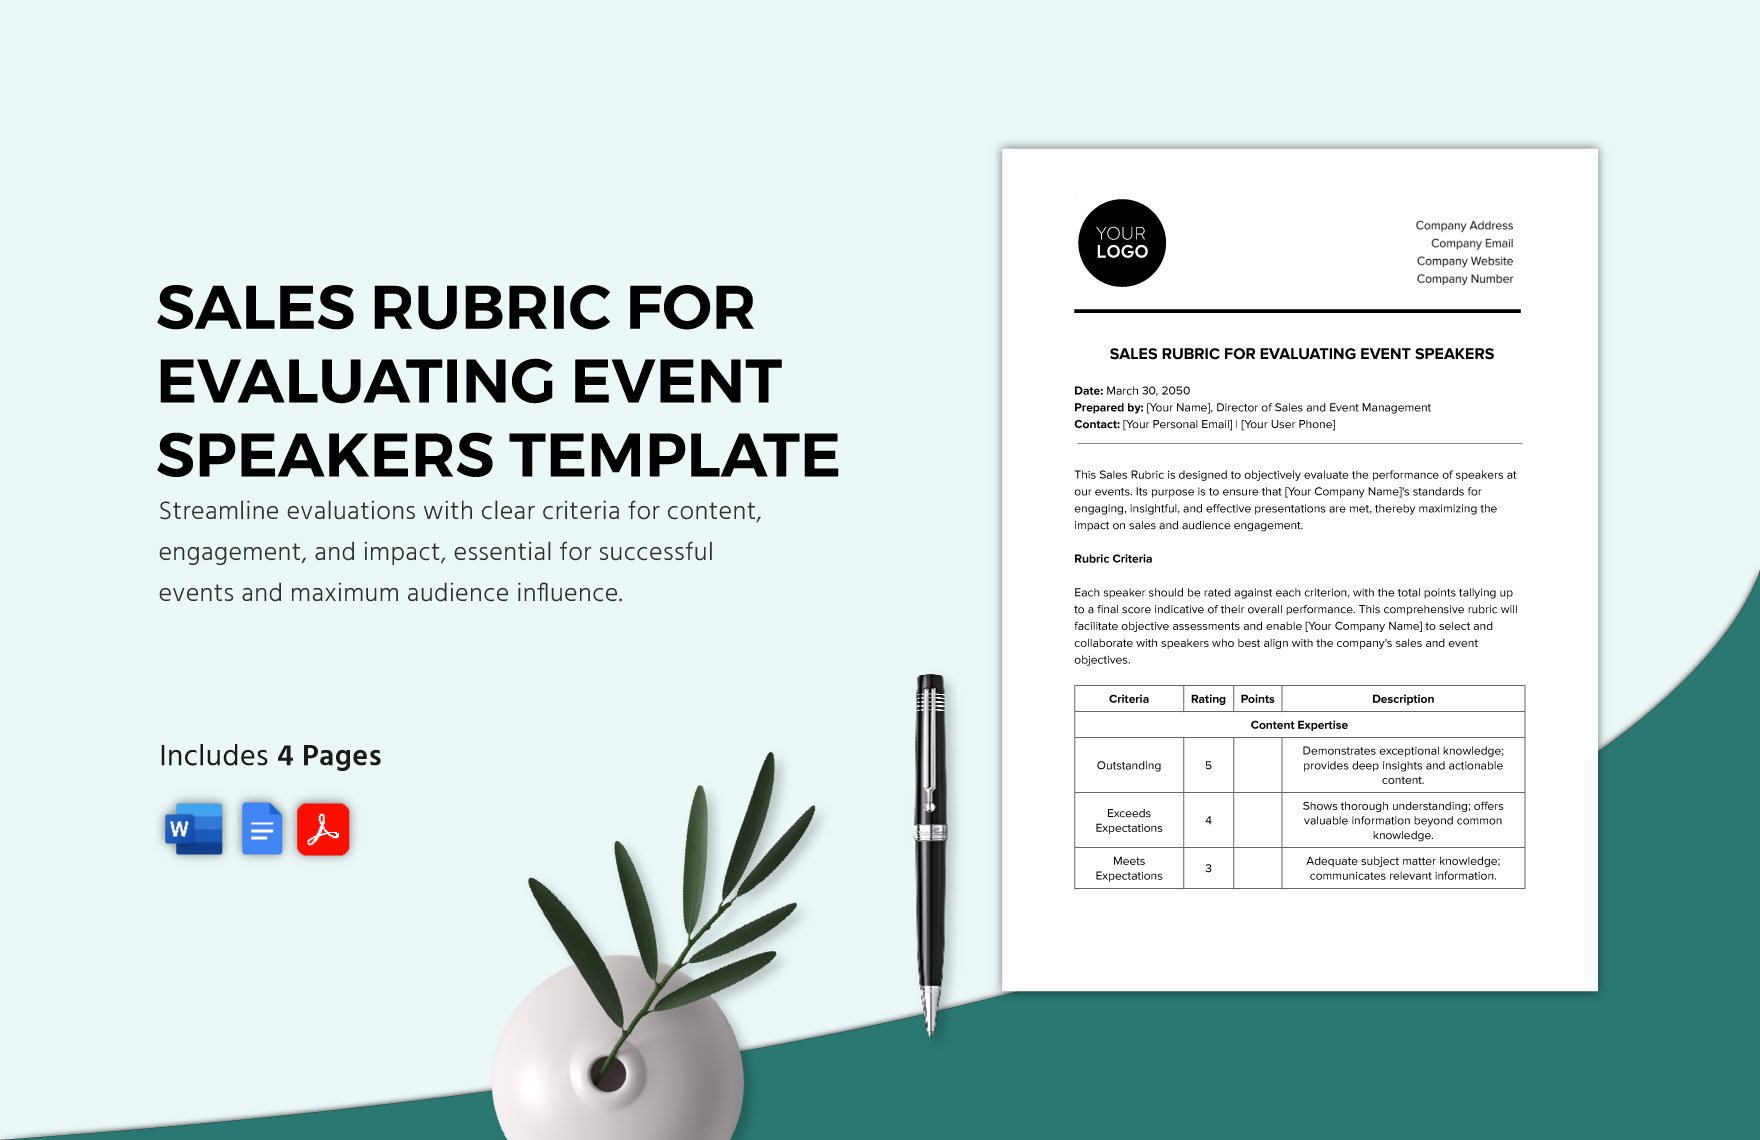 Sales Rubric for Evaluating Event Speakers Template in Word, Google Docs, PDF